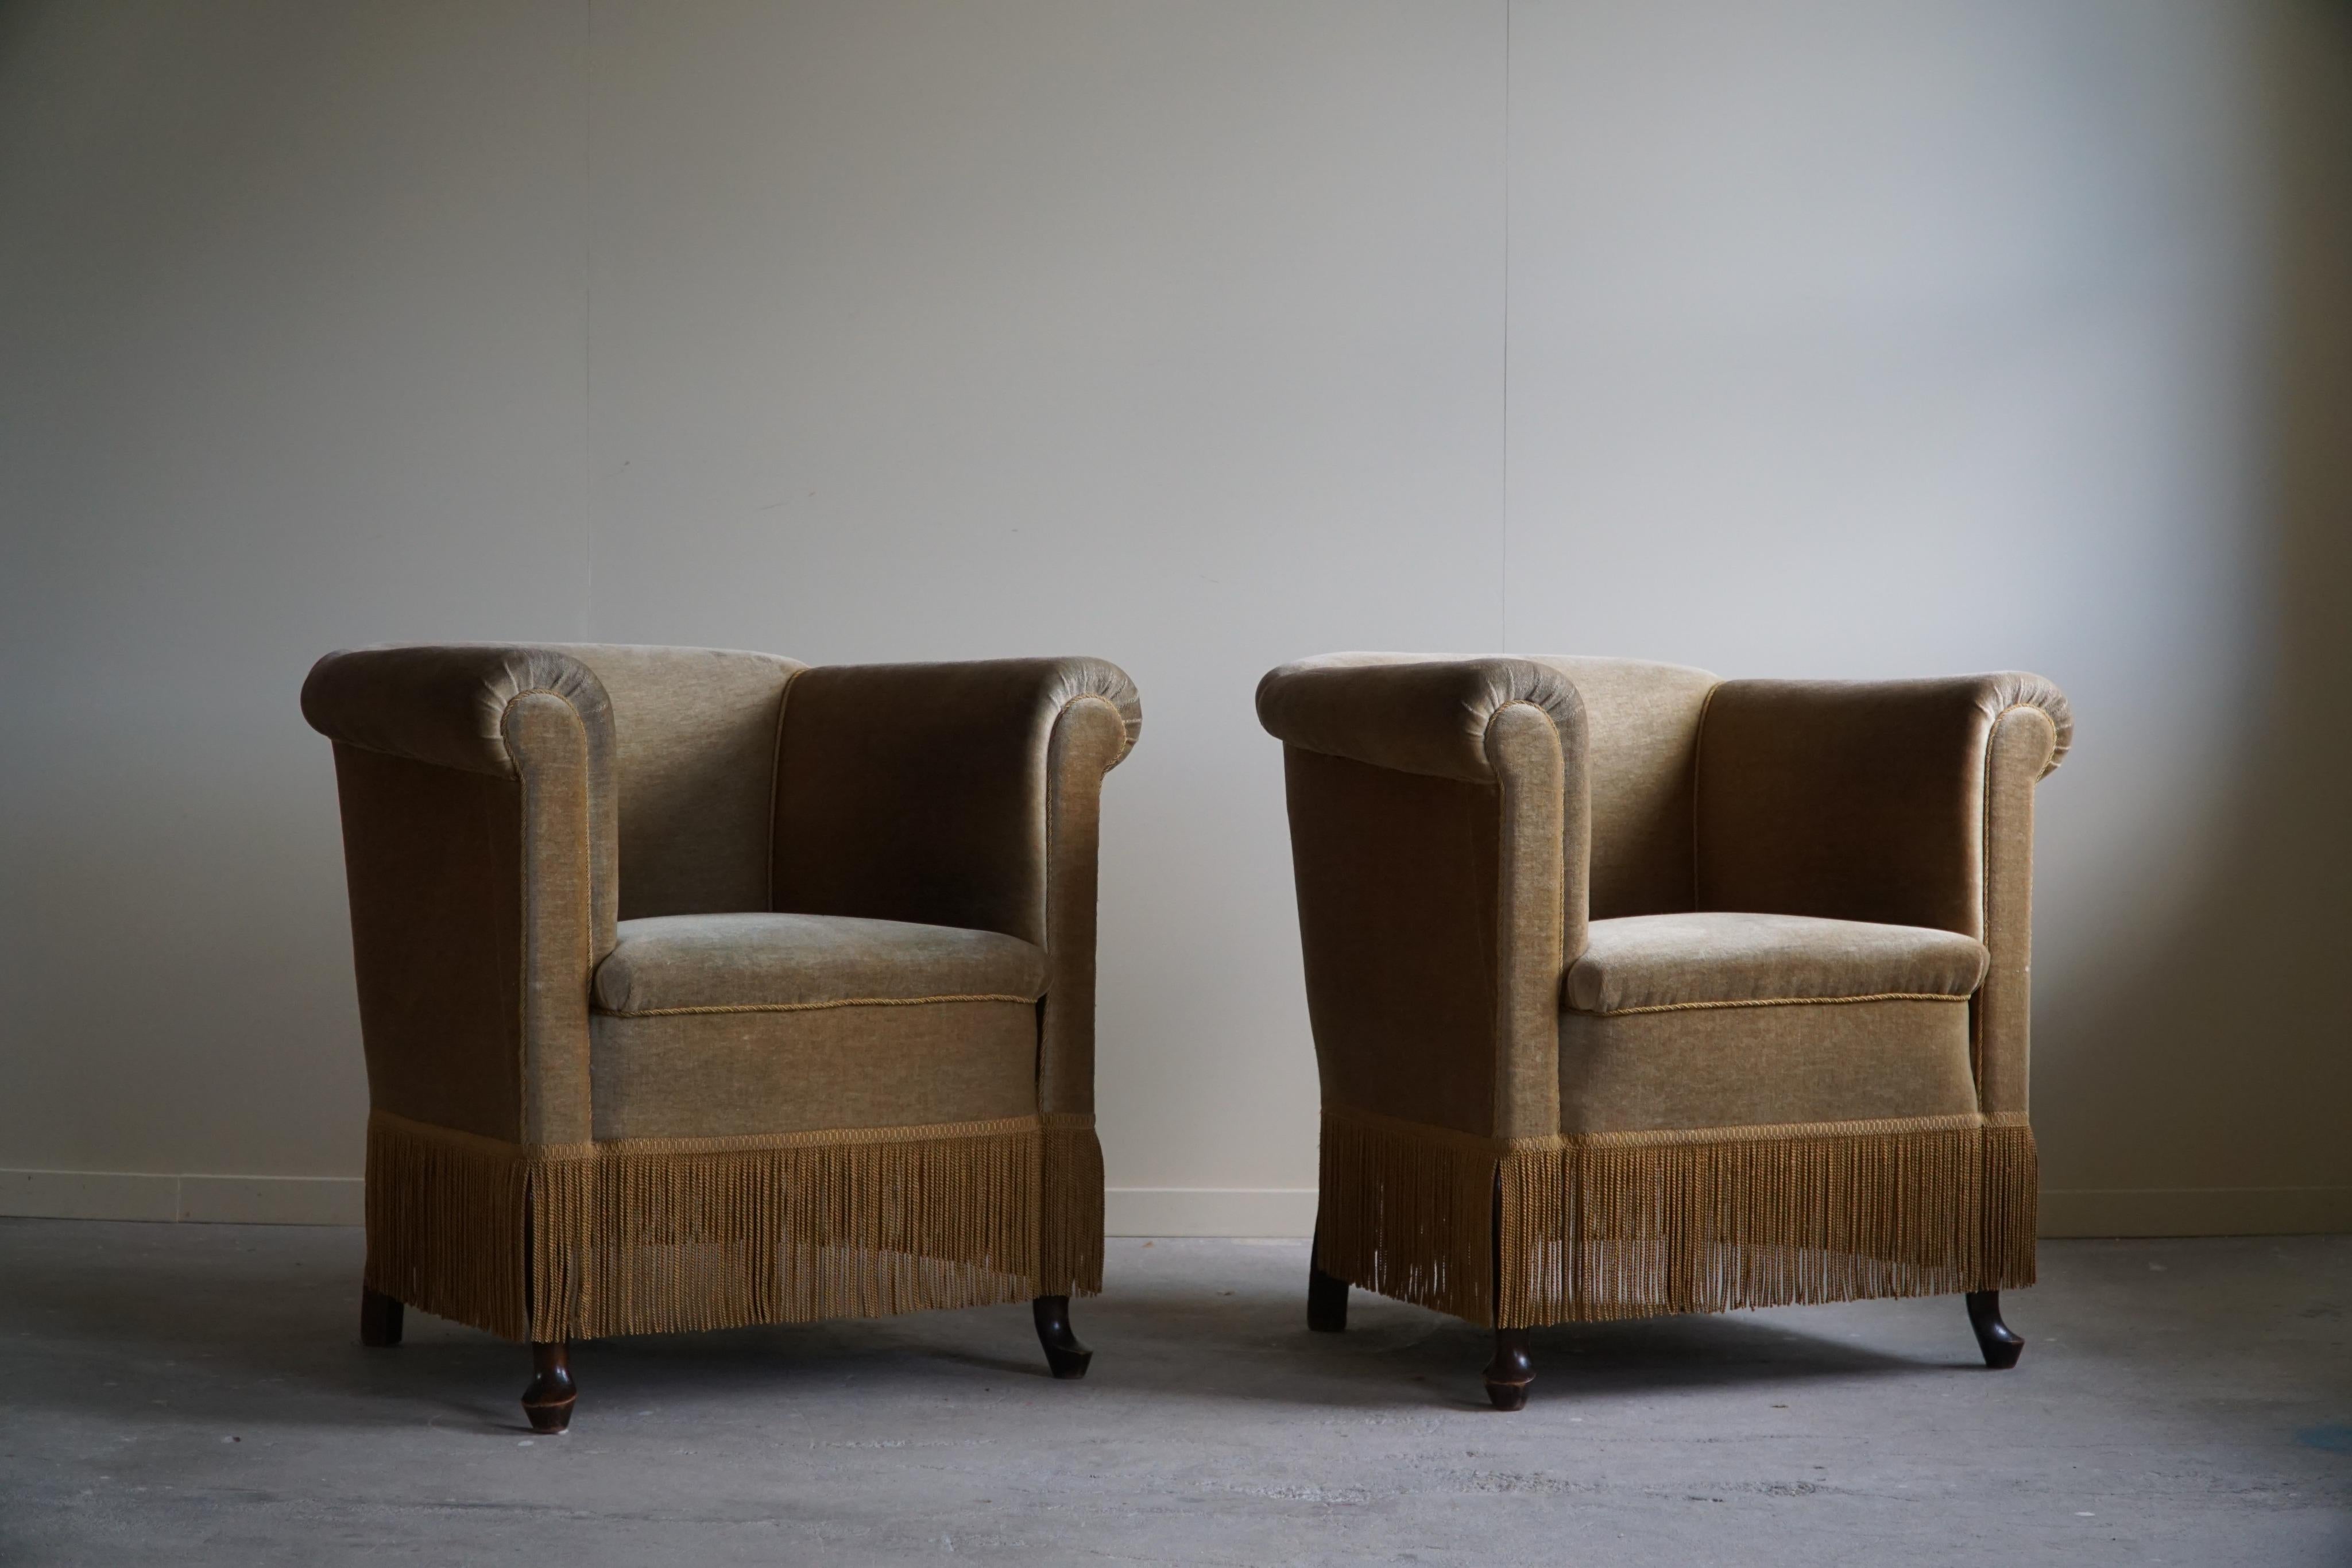 Fabric Pair of Lounge Chairs in Green Velour, Danish Carbinetmaker, Art Deco, 1940s